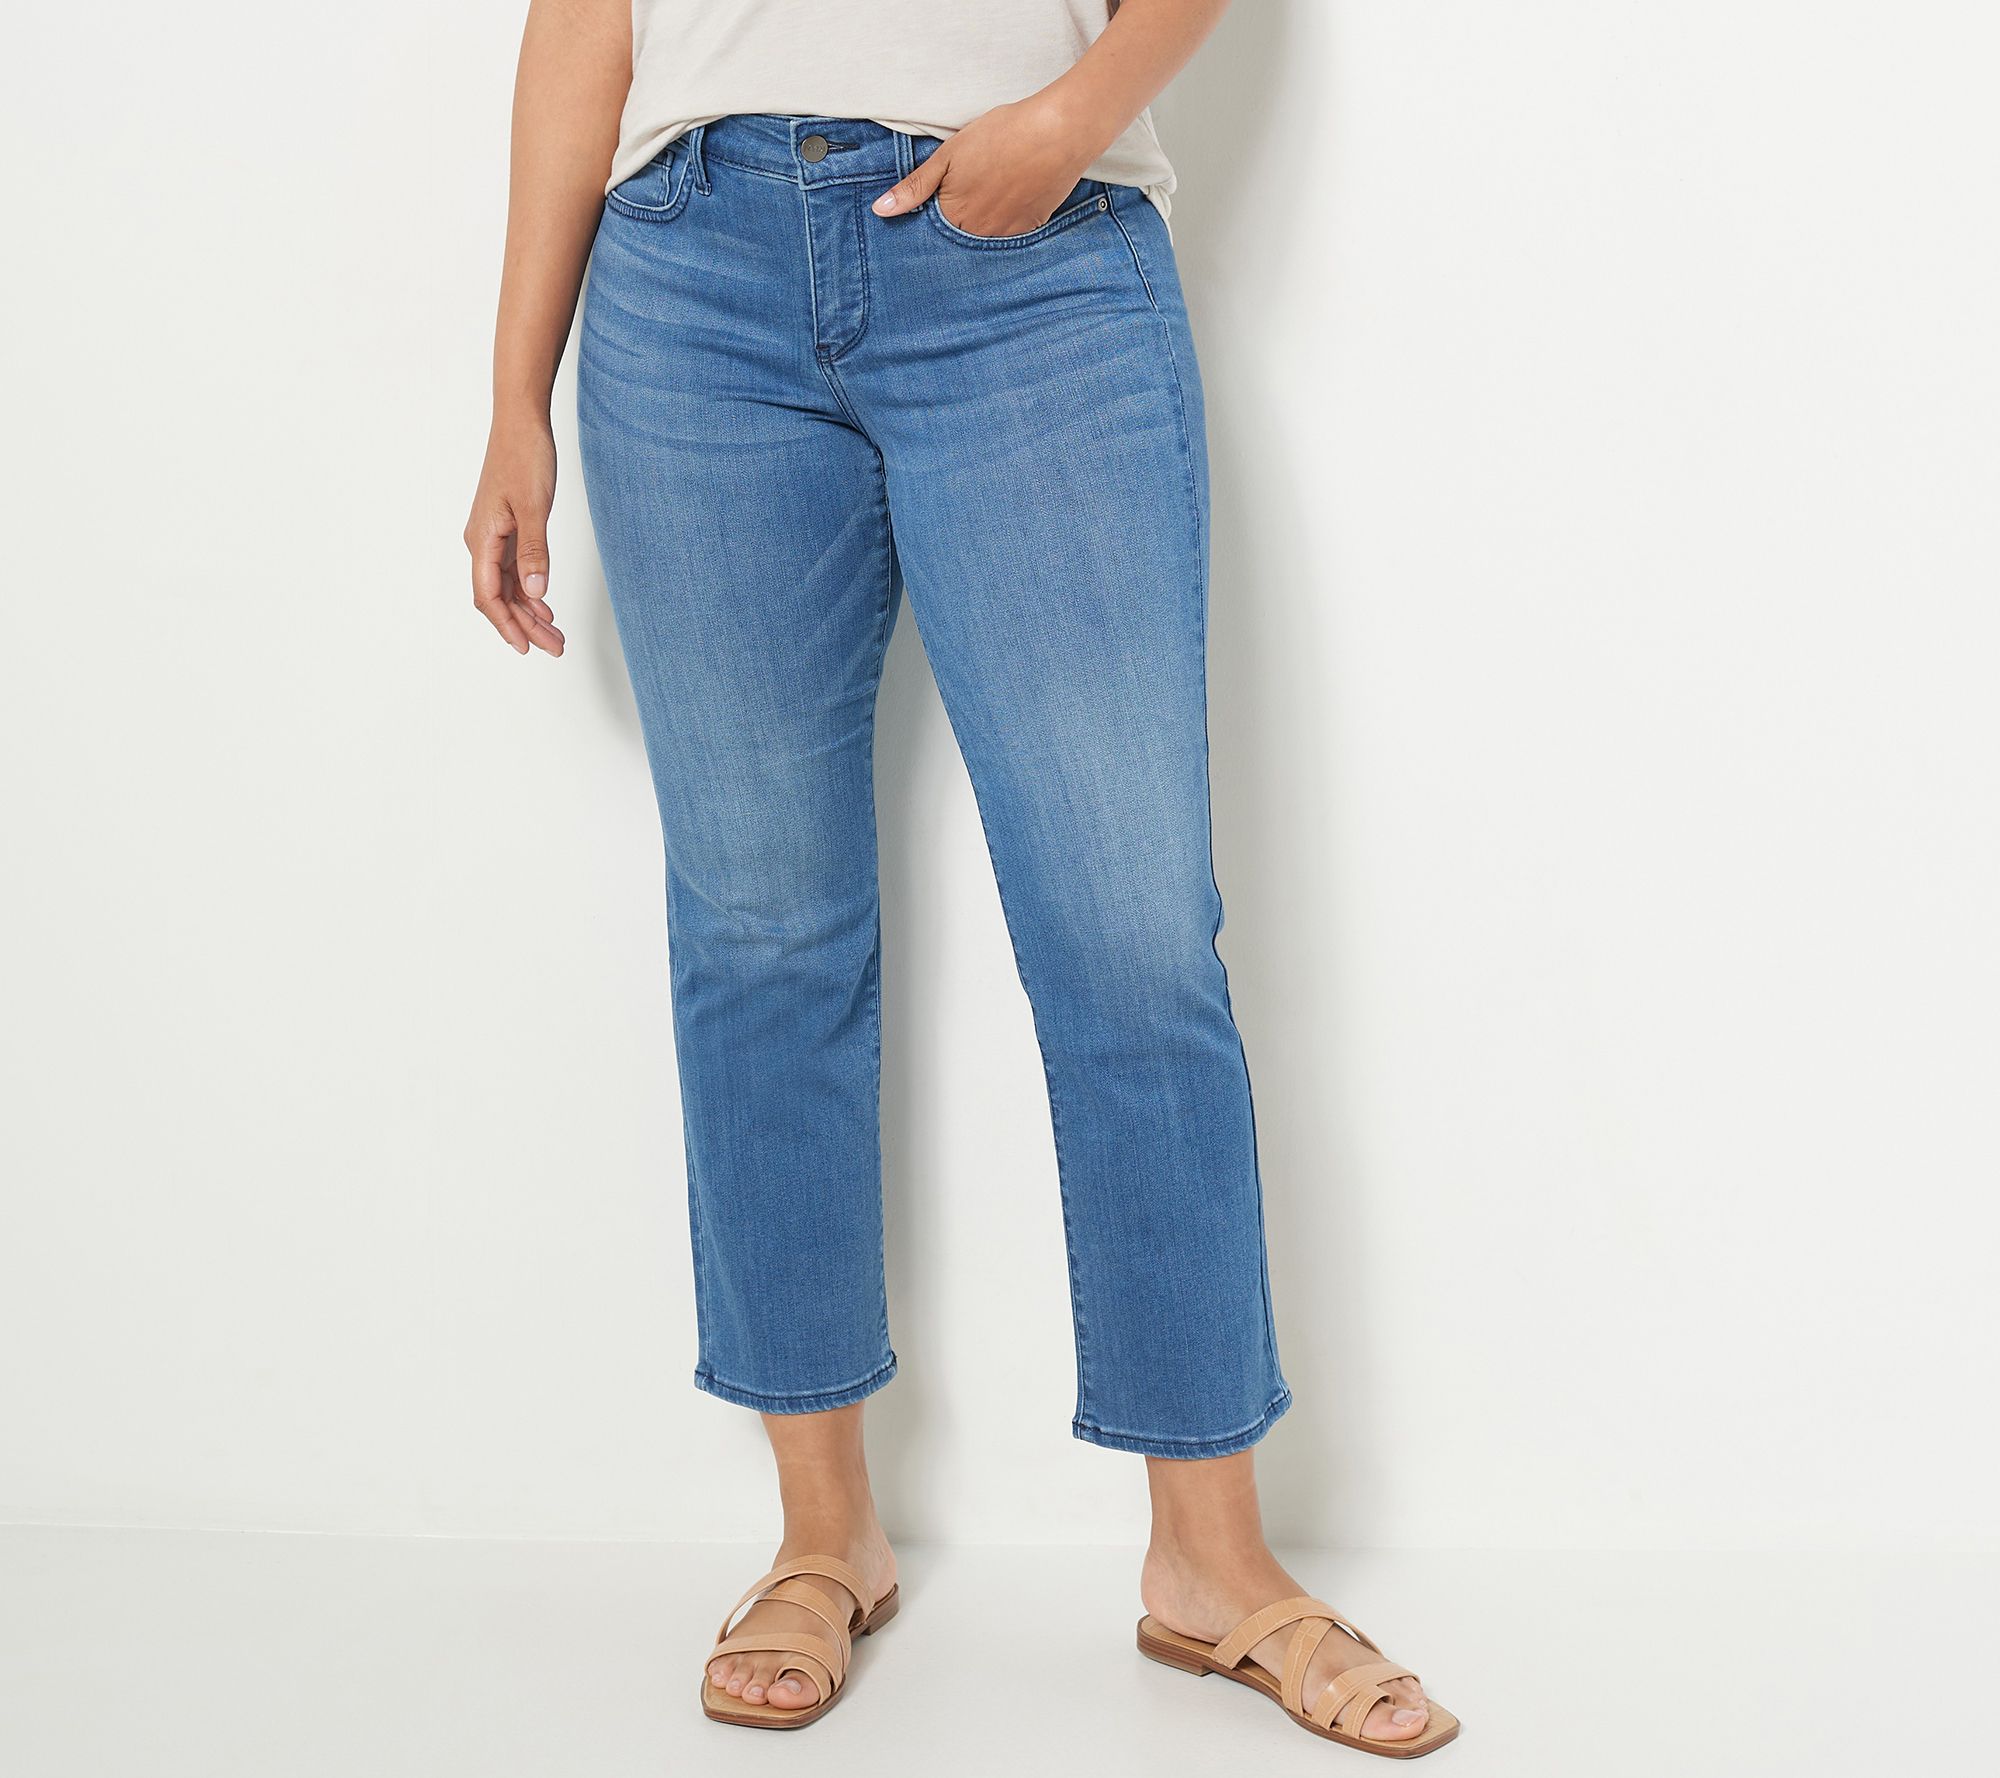 NYDJ Sure Stretch Marilyn Tremaine Jeans- Straight